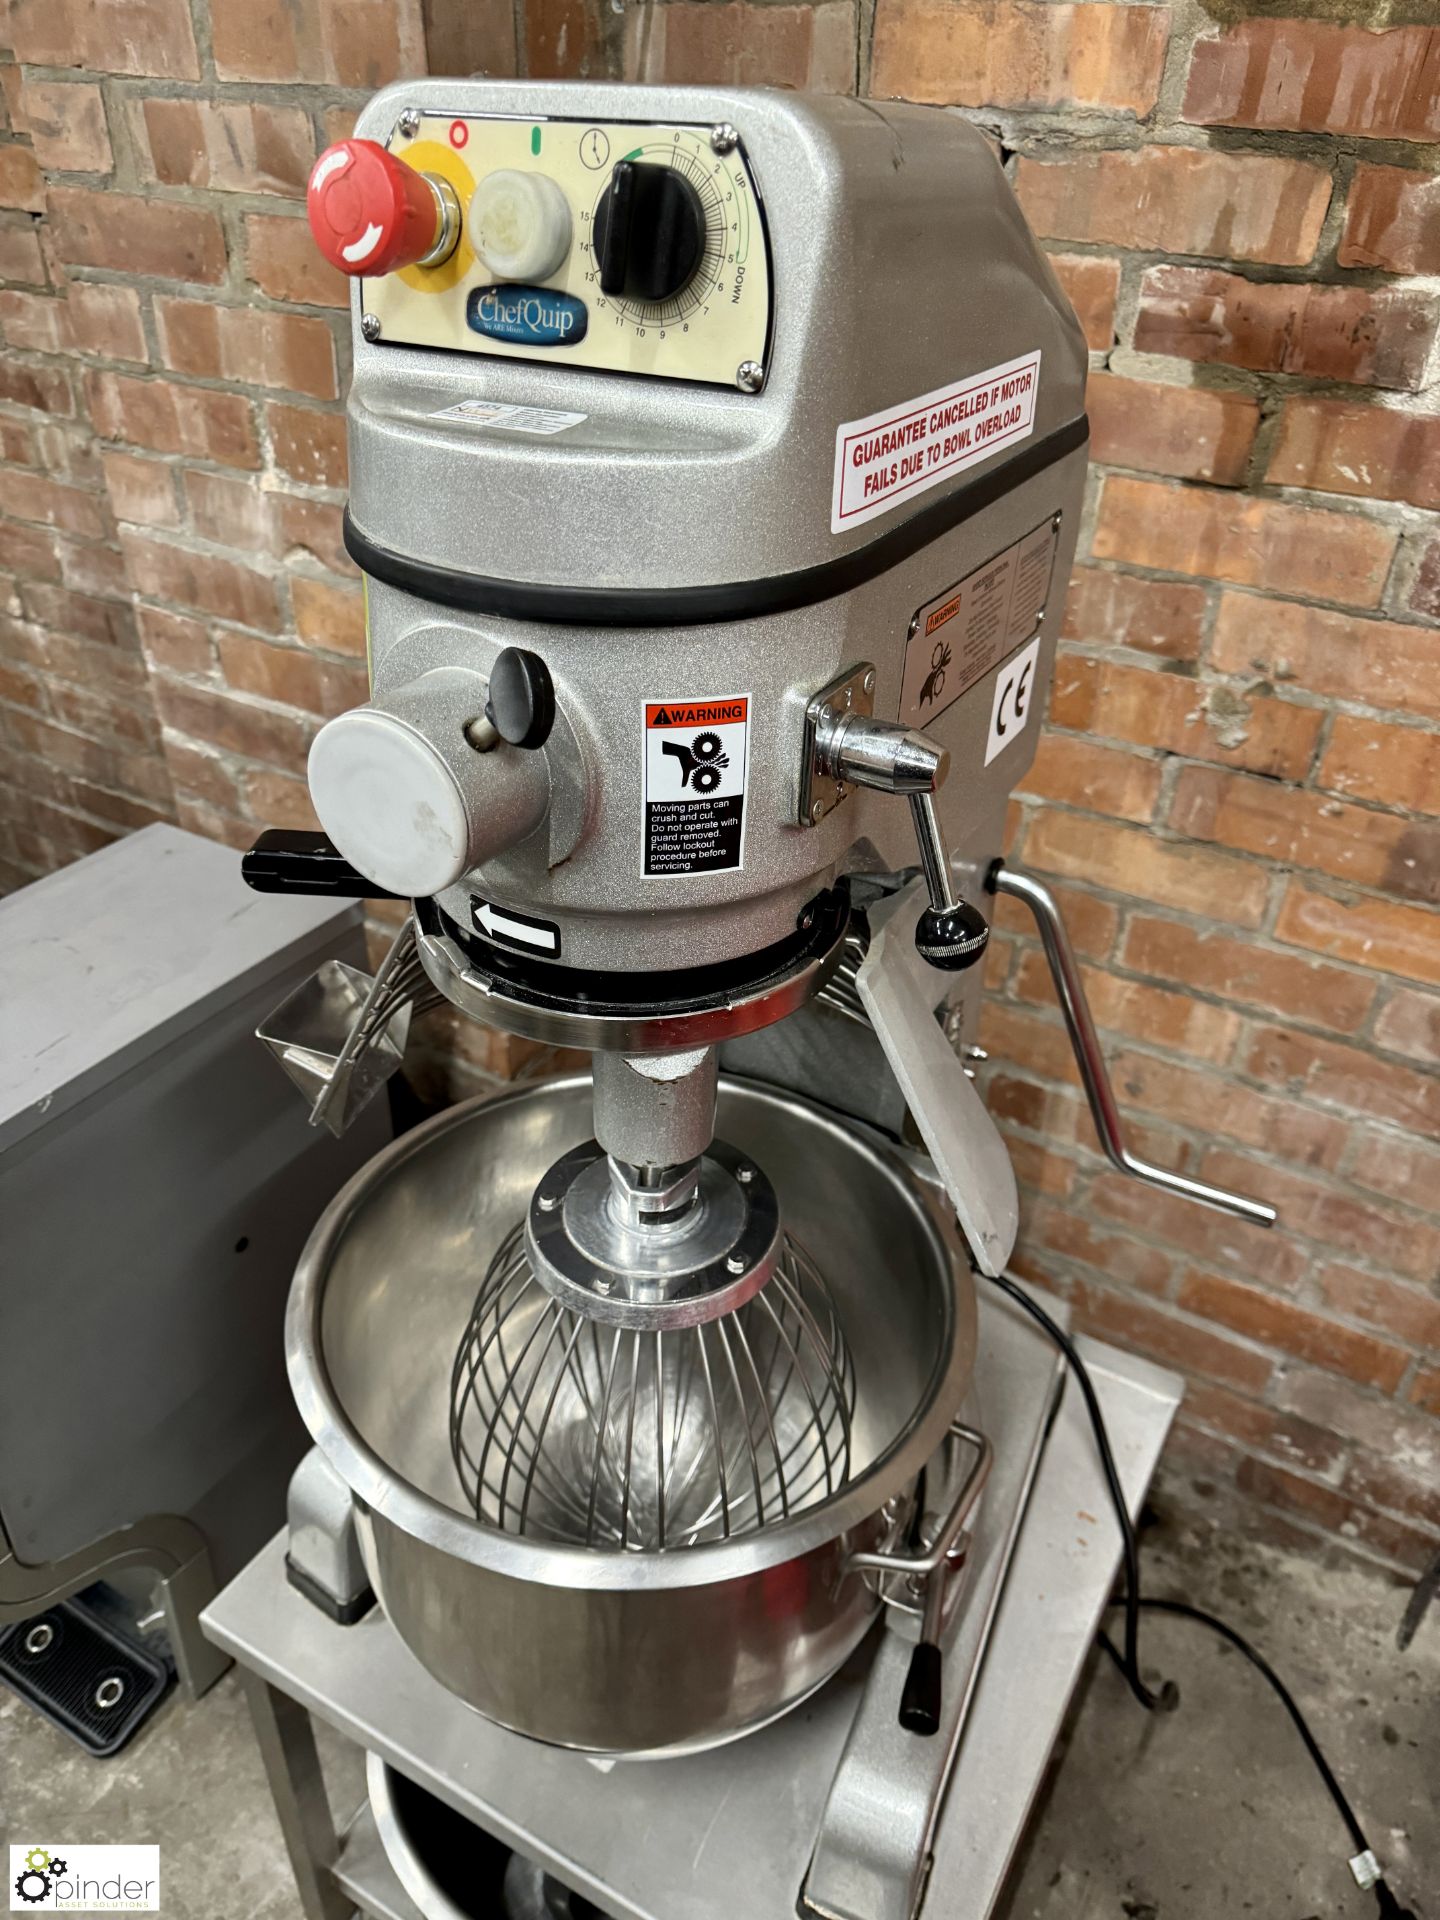 Spar Food Machinery SP-22HA-B Planetary Food Mixer, 240volts, with 2 bowls, whisk, dough hook, - Image 4 of 8